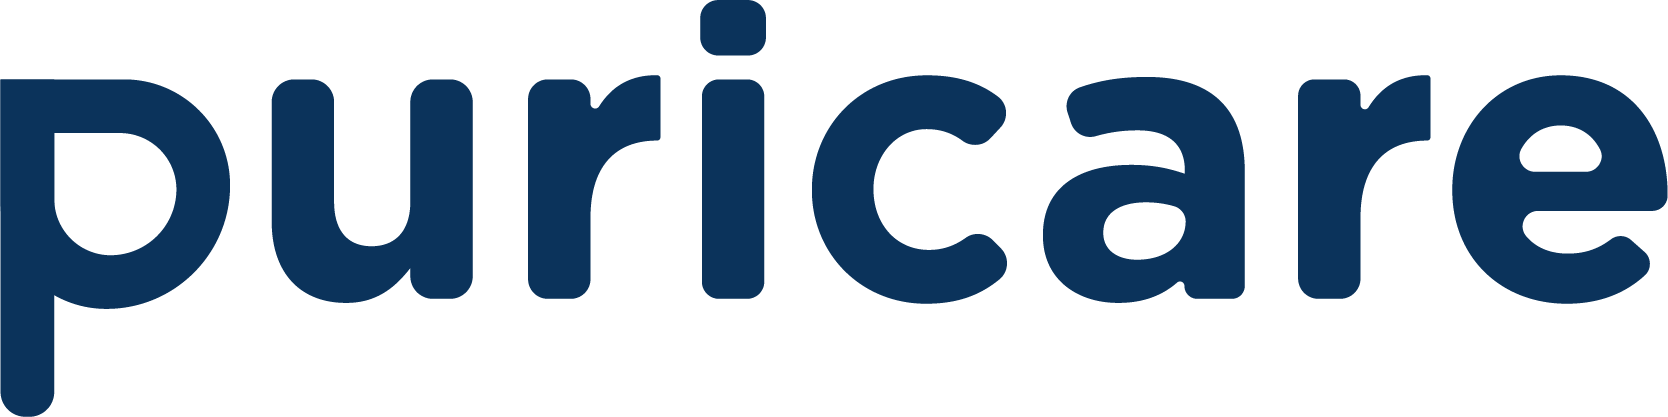 Puricare Private Limited logo